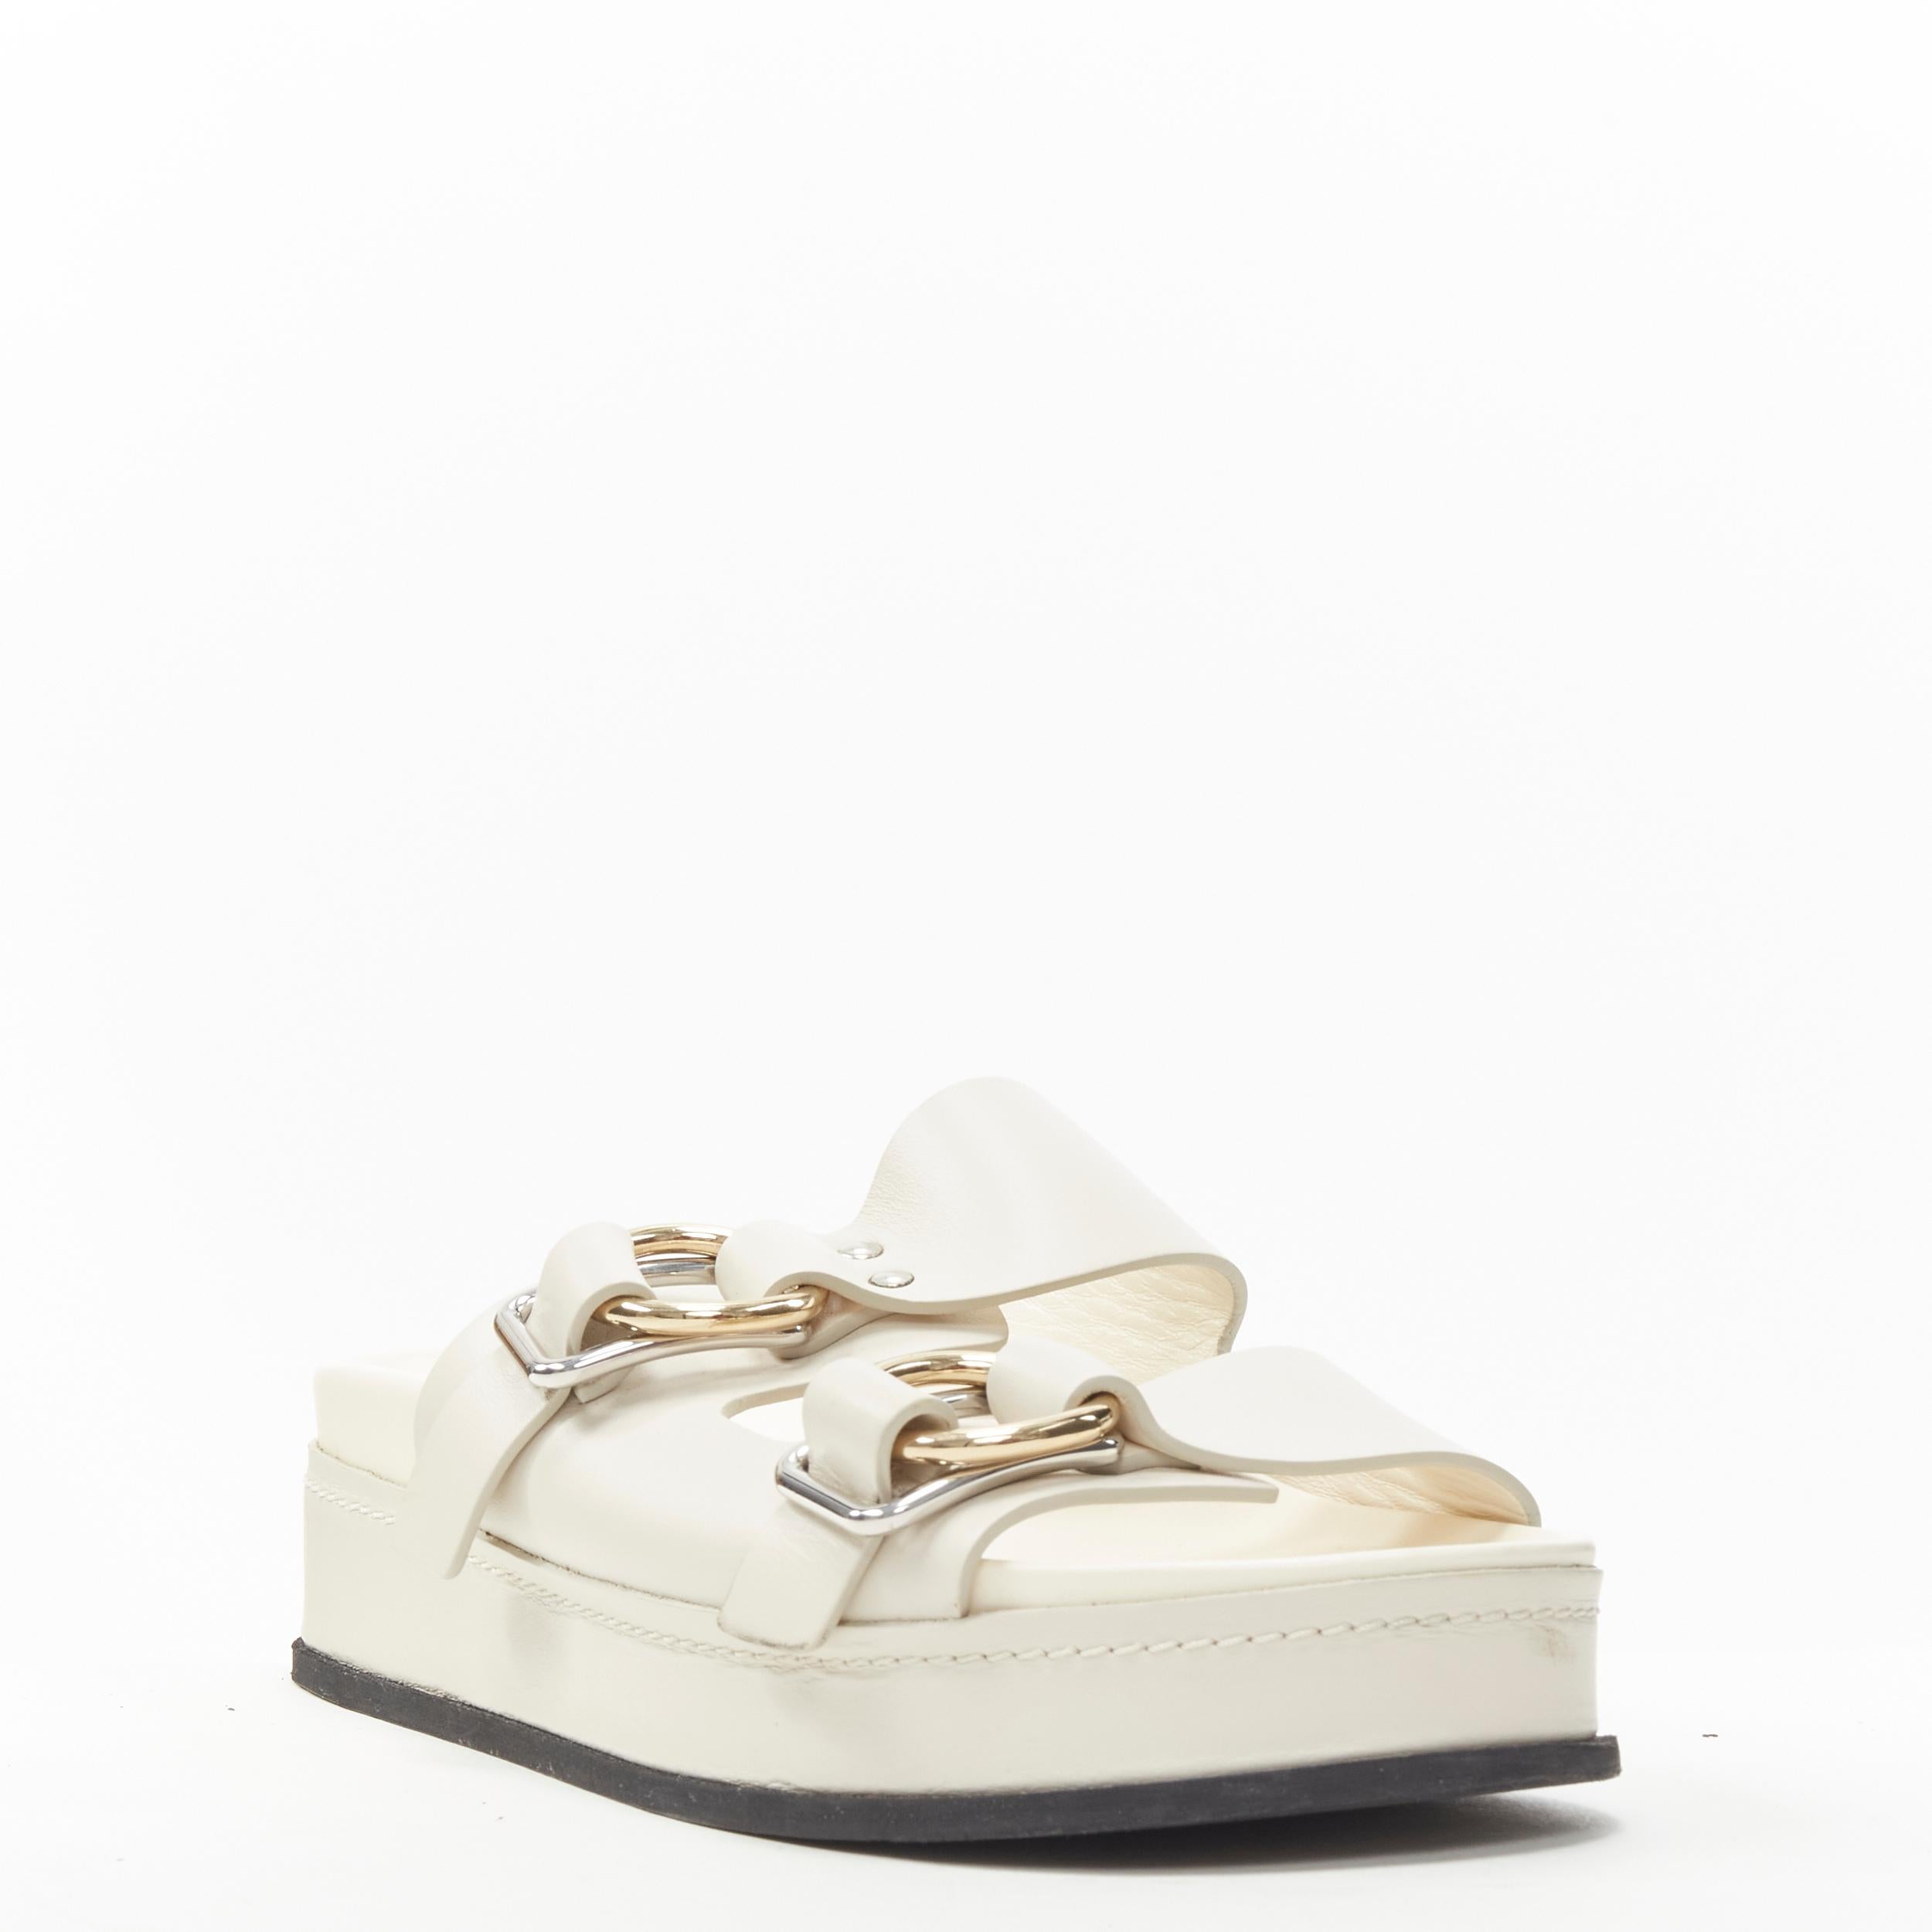 3.1 PHILLIP LIM cream white leather mixed metal buckle platform sandals EU38 US8 
Reference: LNKO/A01895 
Brand: 3.1 Phillip Lim 
Designer: Phillip Lim 
Material: Leather 
Color: White 
Pattern: Solid 
Extra Detail: Mixed metal shaped buckle. 
Made